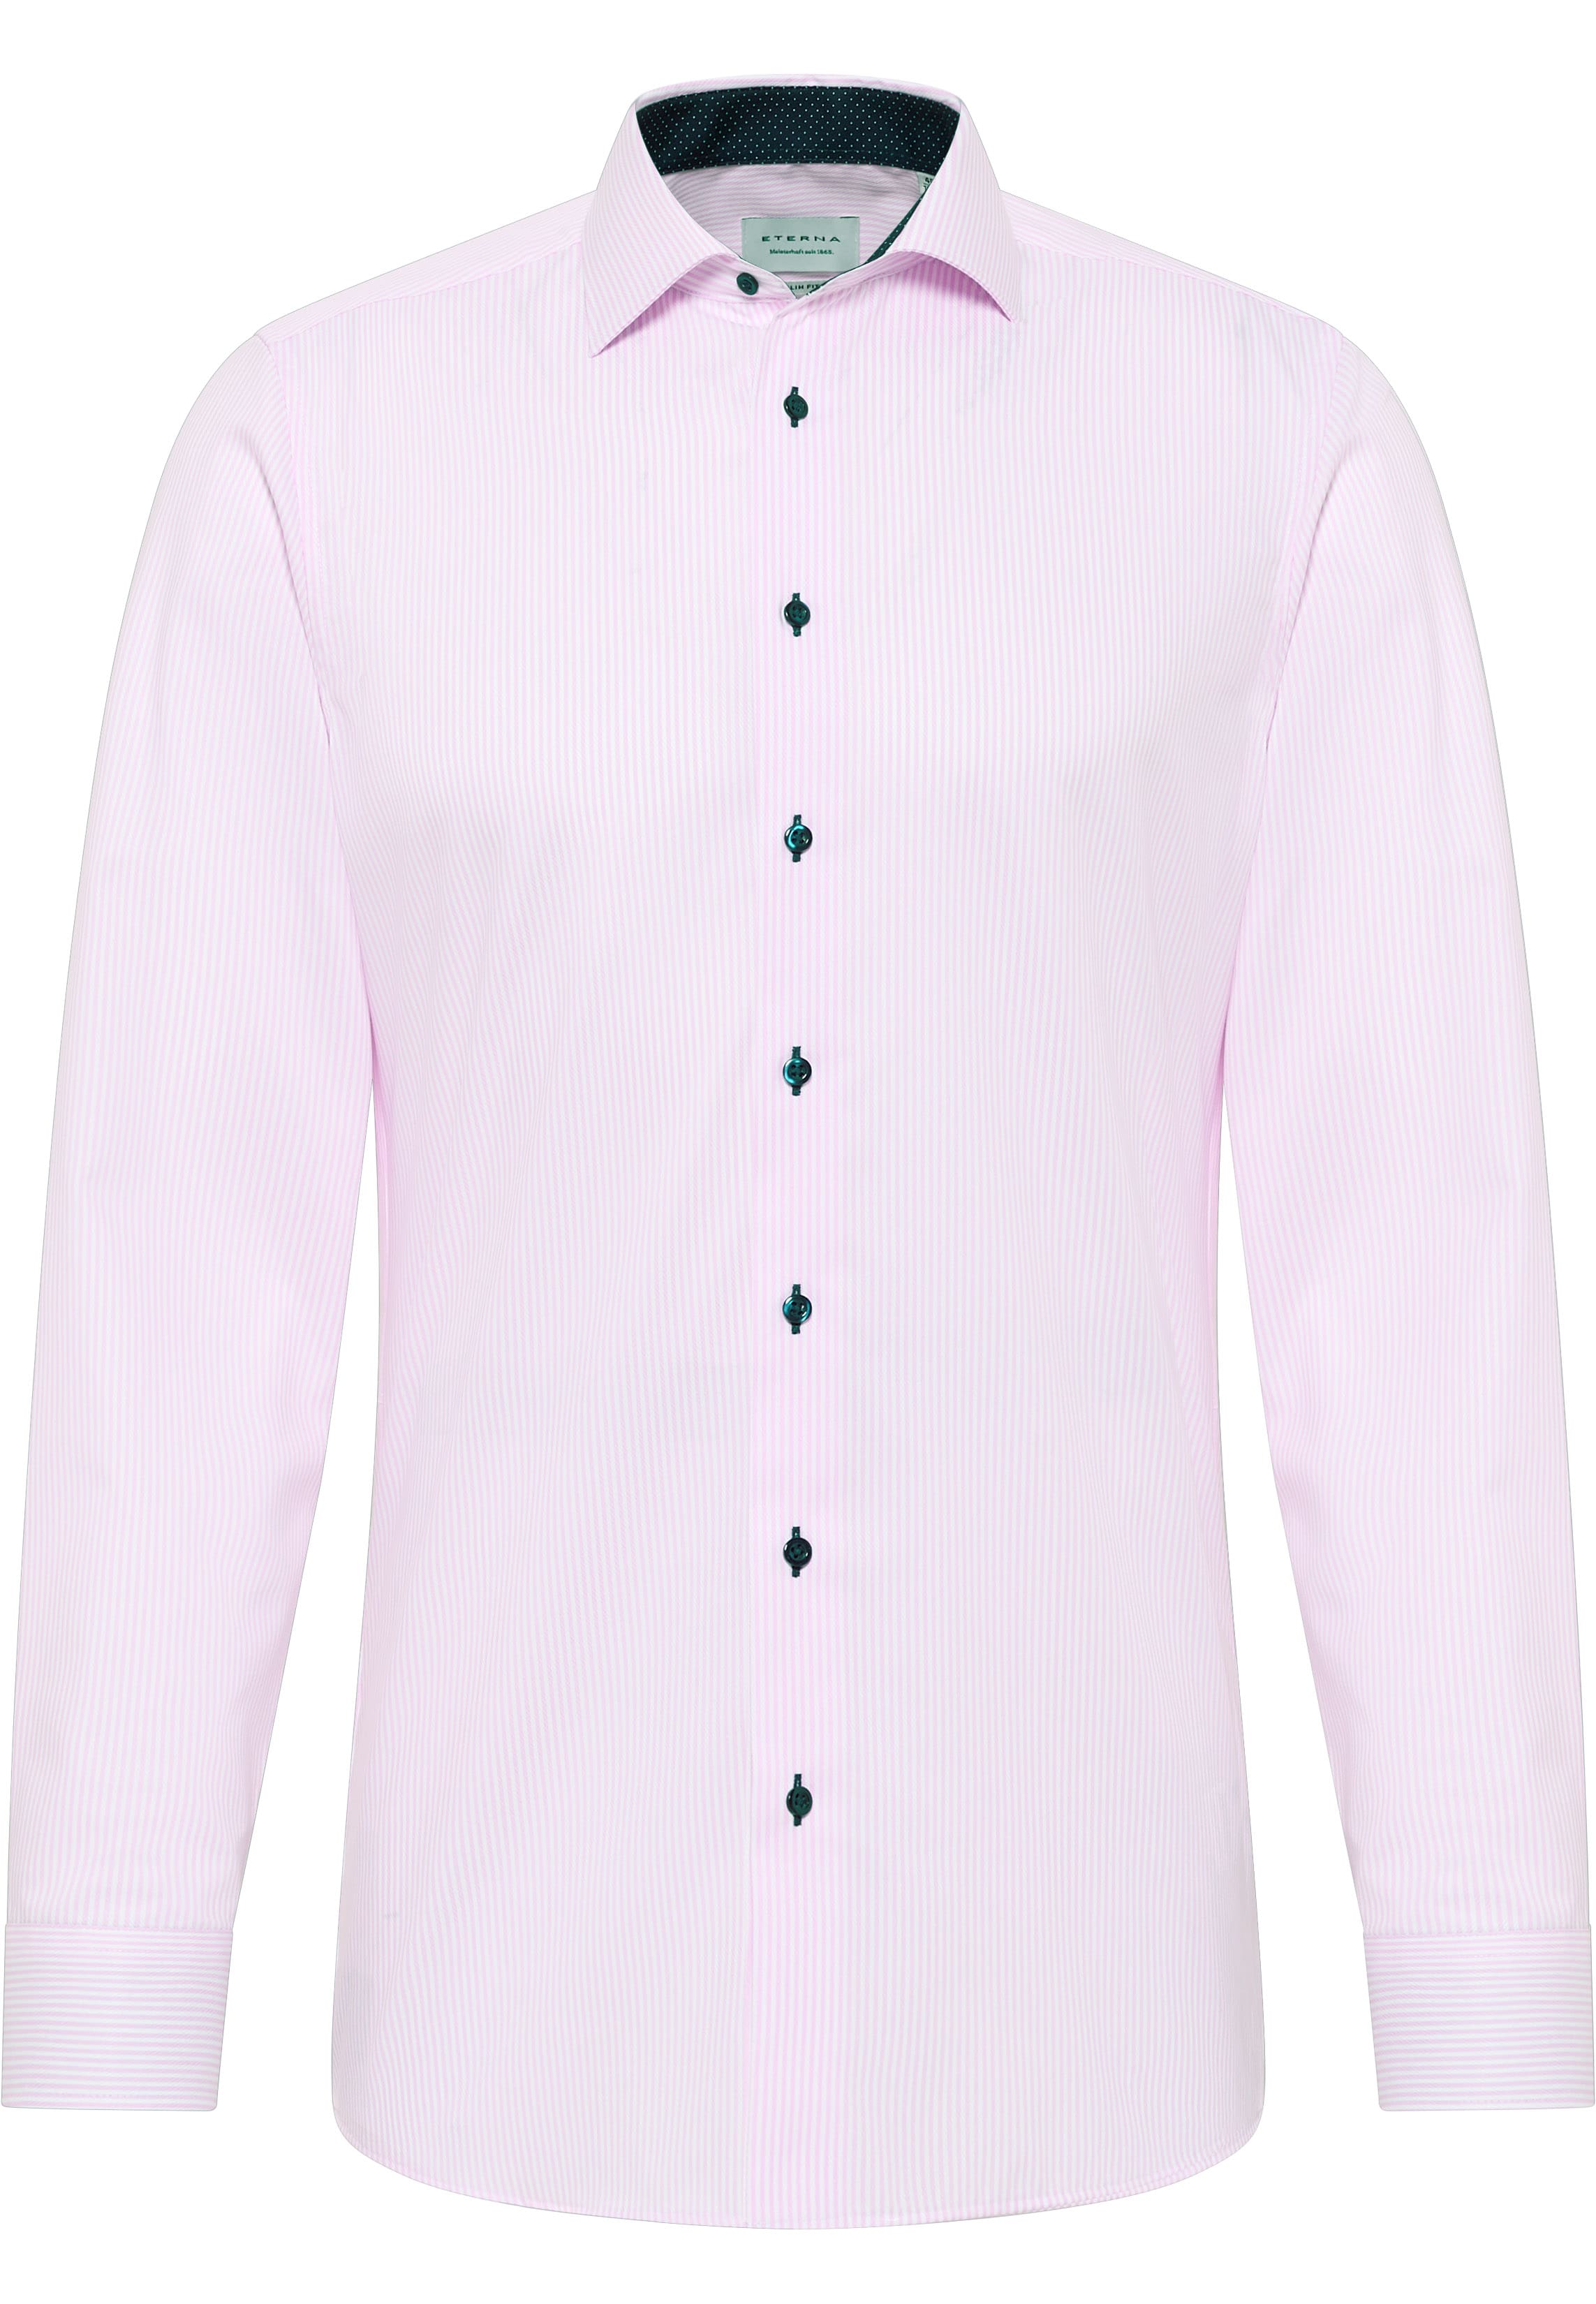 SLIM FIT Shirt in rose striped